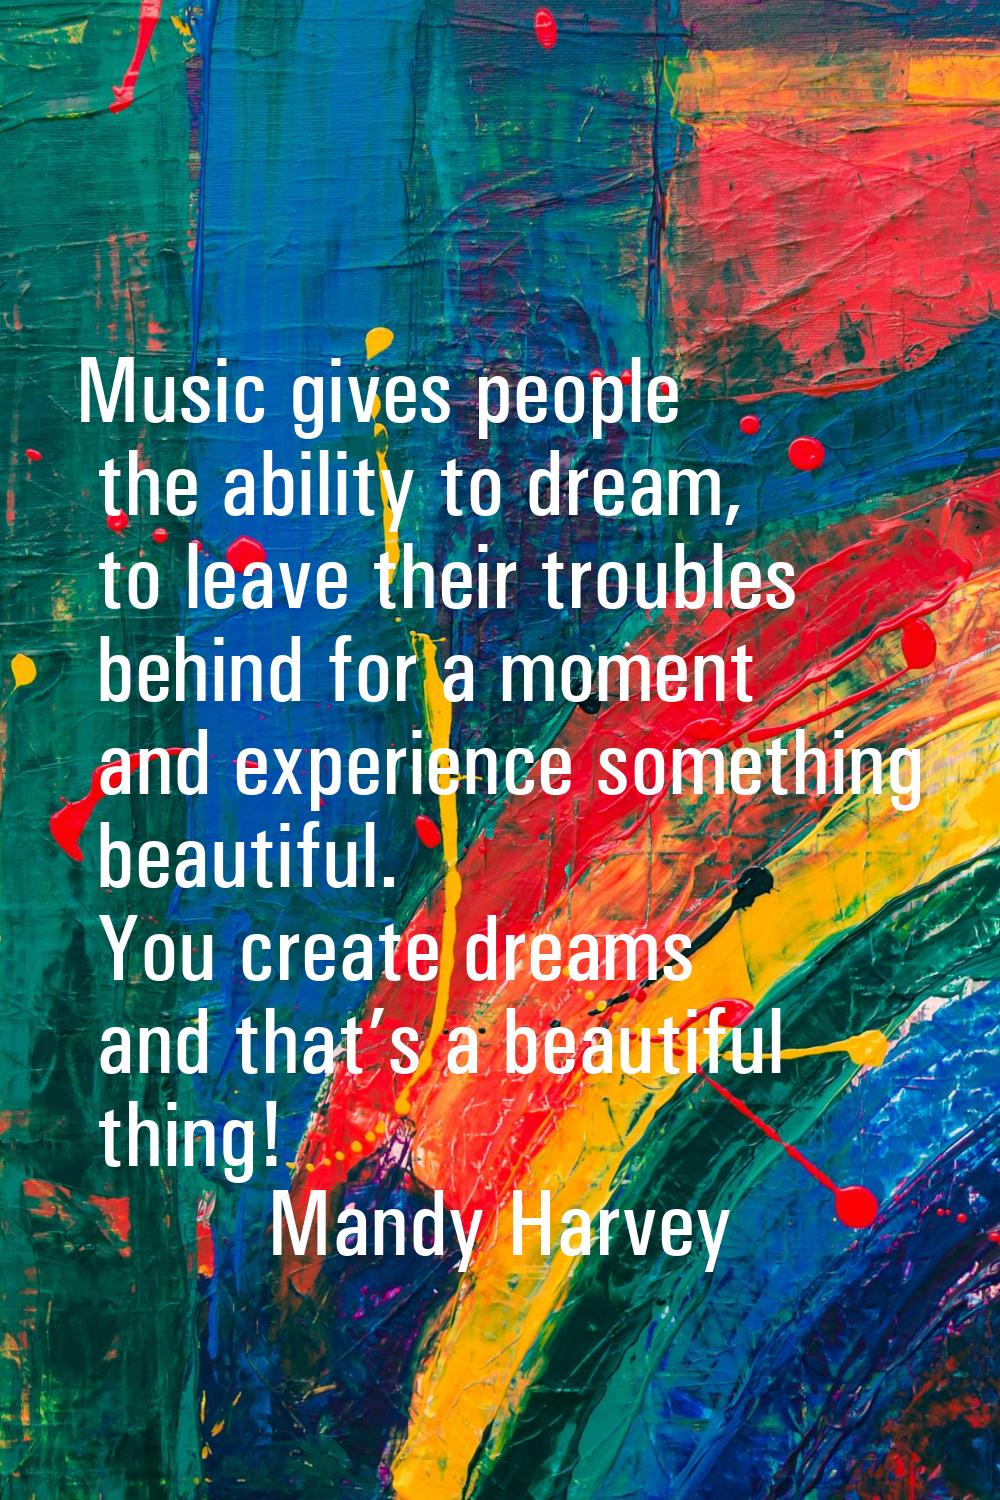 Music gives people the ability to dream, to leave their troubles behind for a moment and experience